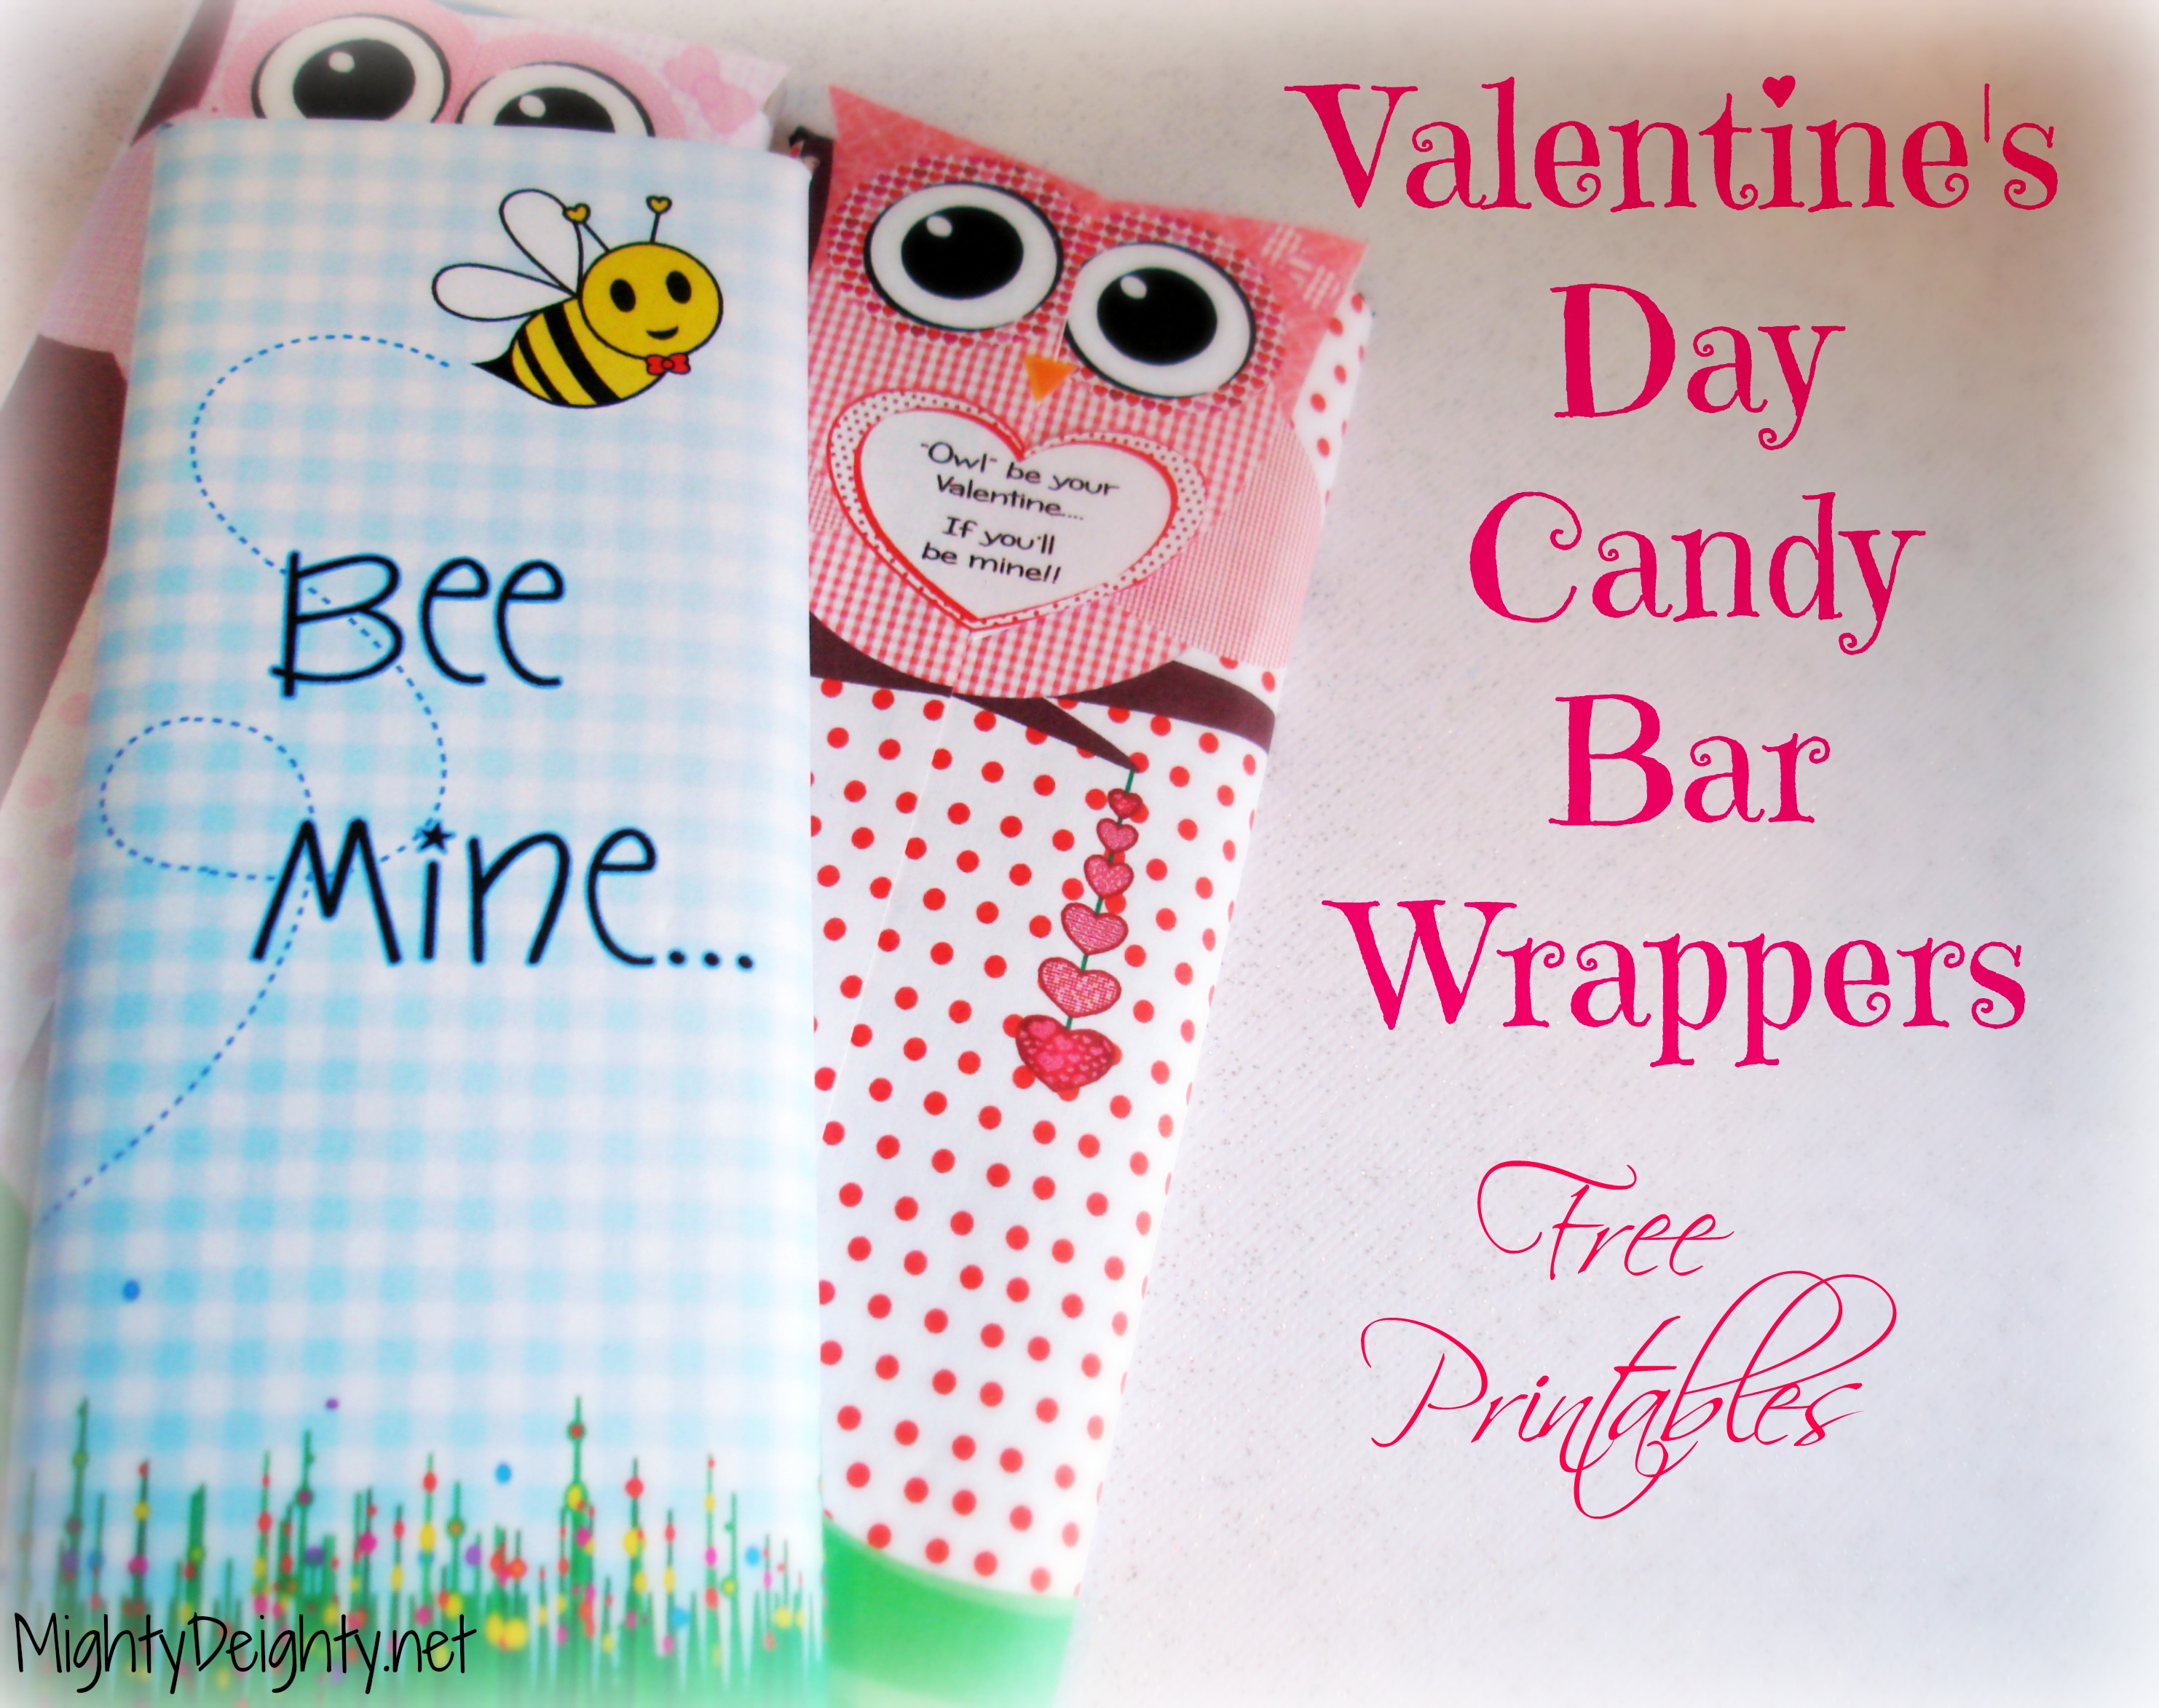 6 Best Images of Free Printable Candy Templates - Printable Candy